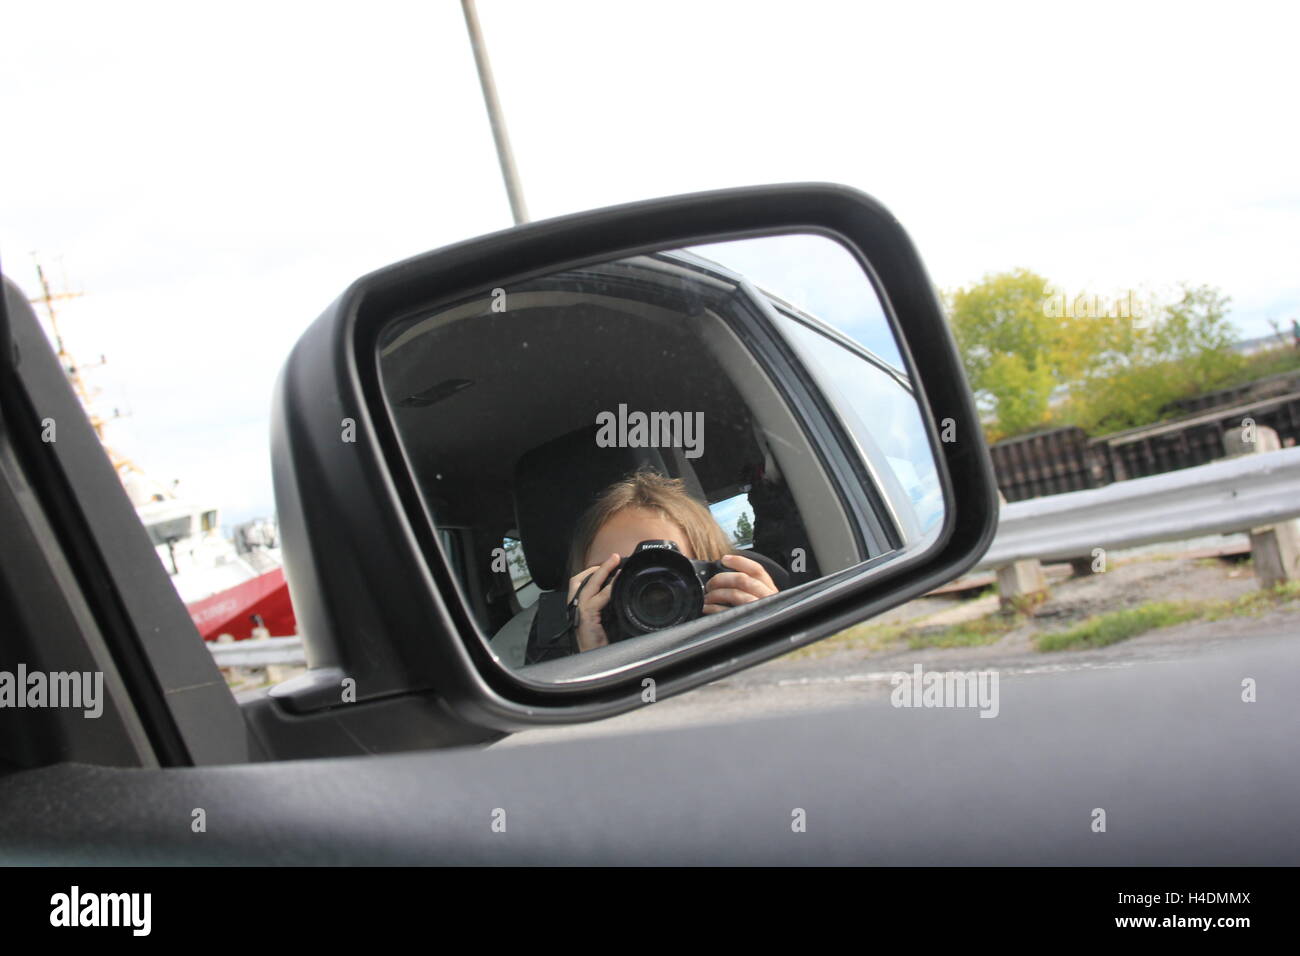 Little girl attempting to take a selfie in a side mirror of an automobile. Stock Photo